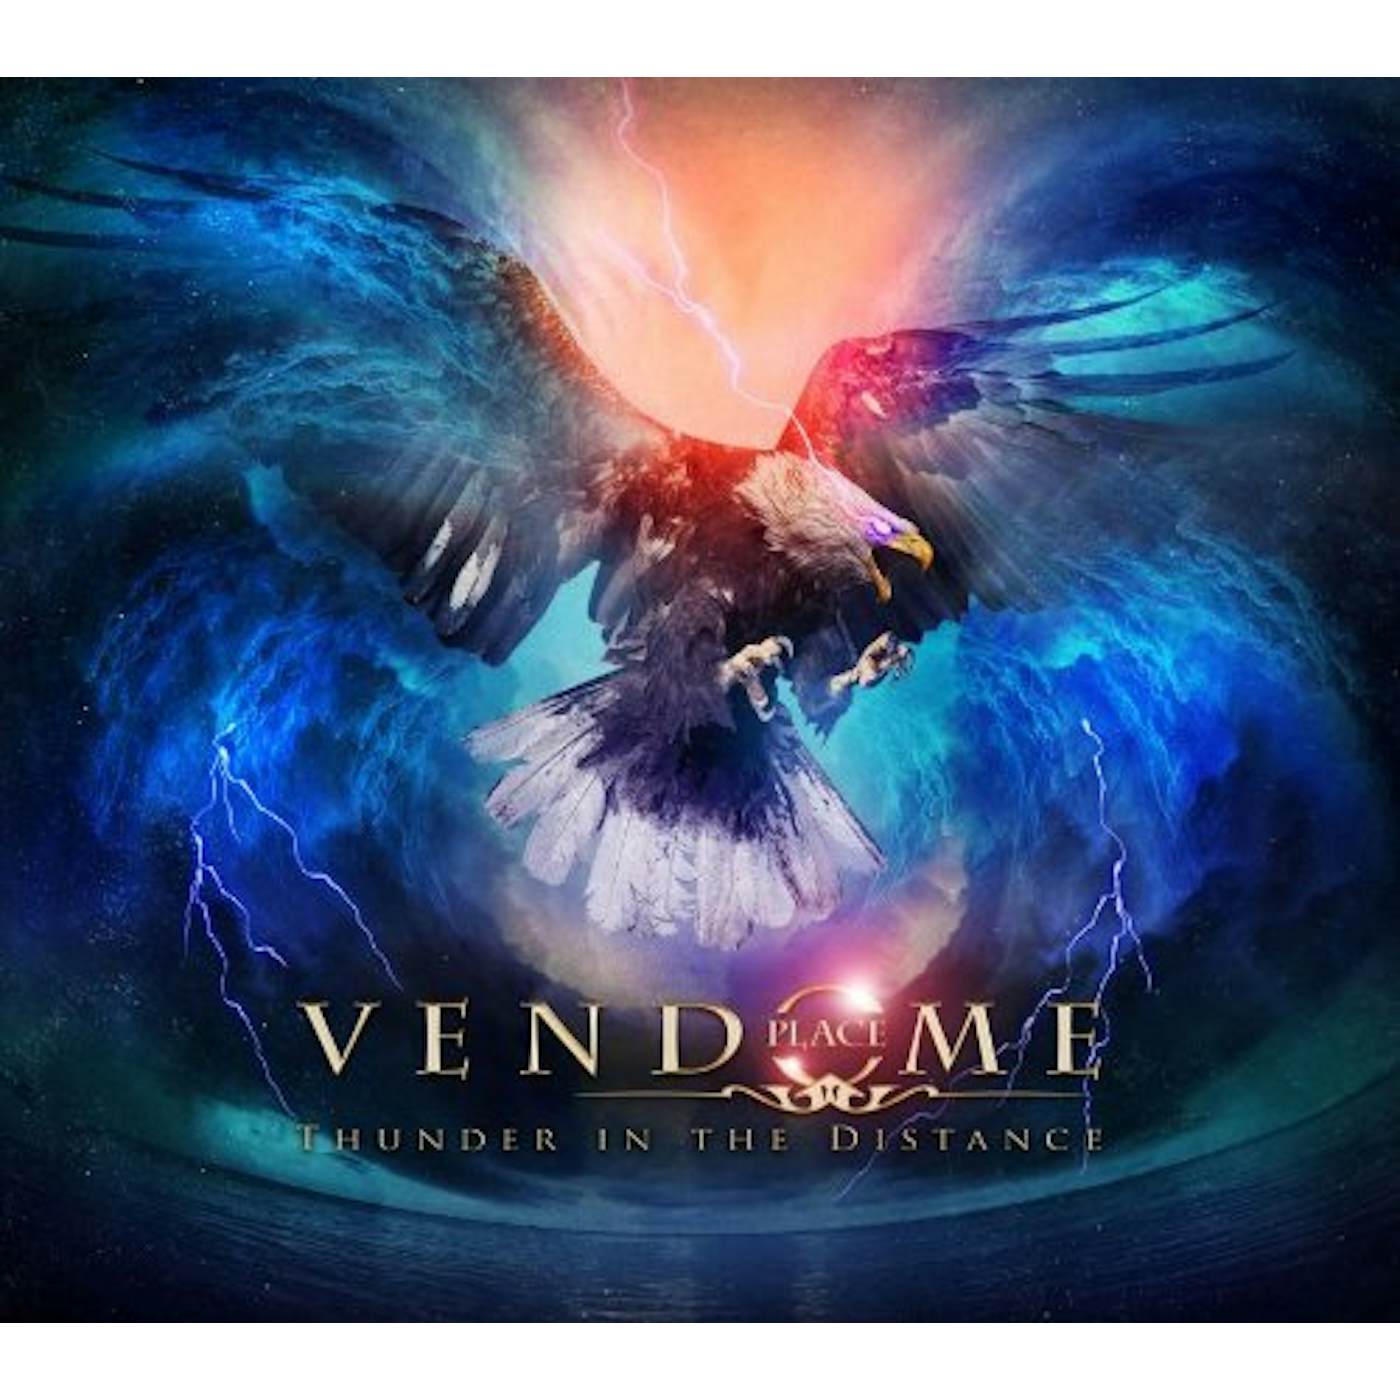 Place Vendome Thunder In The Distance Vinyl Record